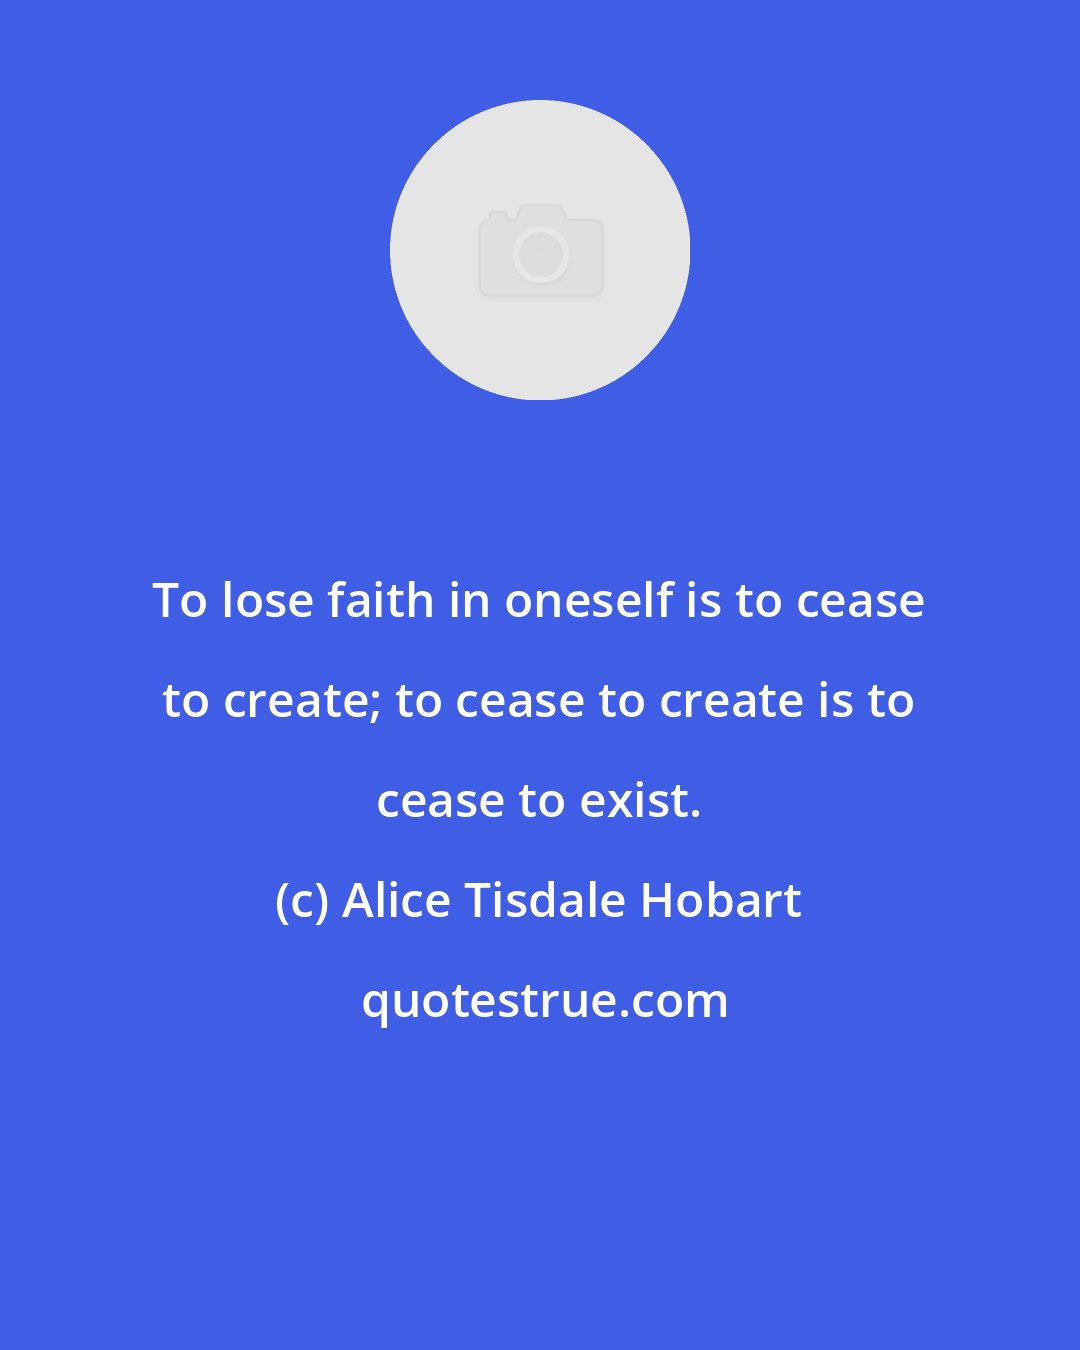 Alice Tisdale Hobart: To lose faith in oneself is to cease to create; to cease to create is to cease to exist.